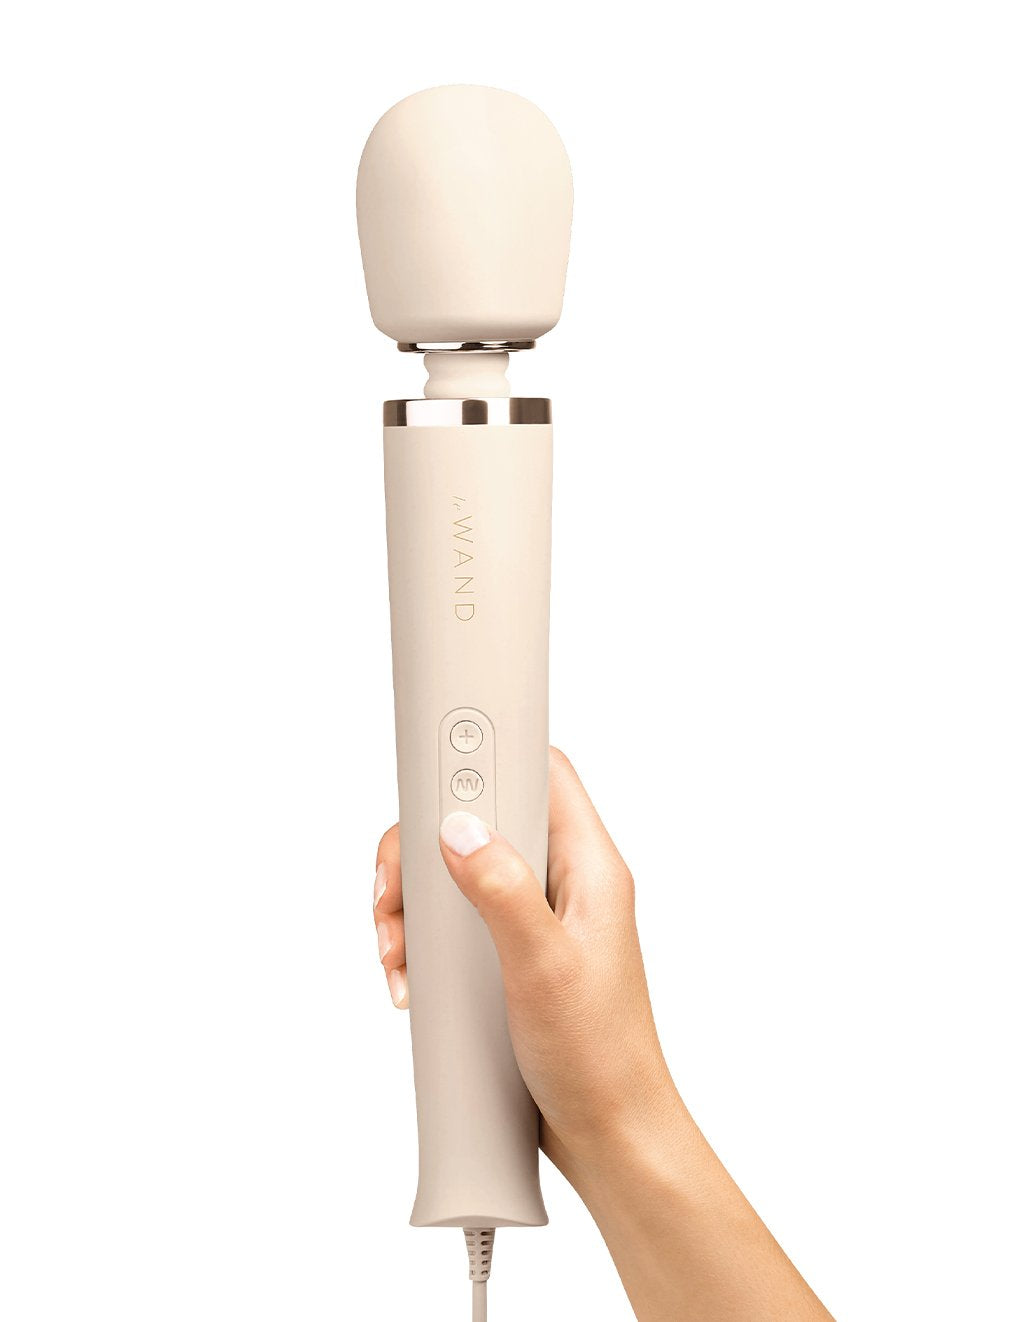 Le Wand Plug-In Vibrating Body Massager with 8 Foot Cord- Cream- In Hand